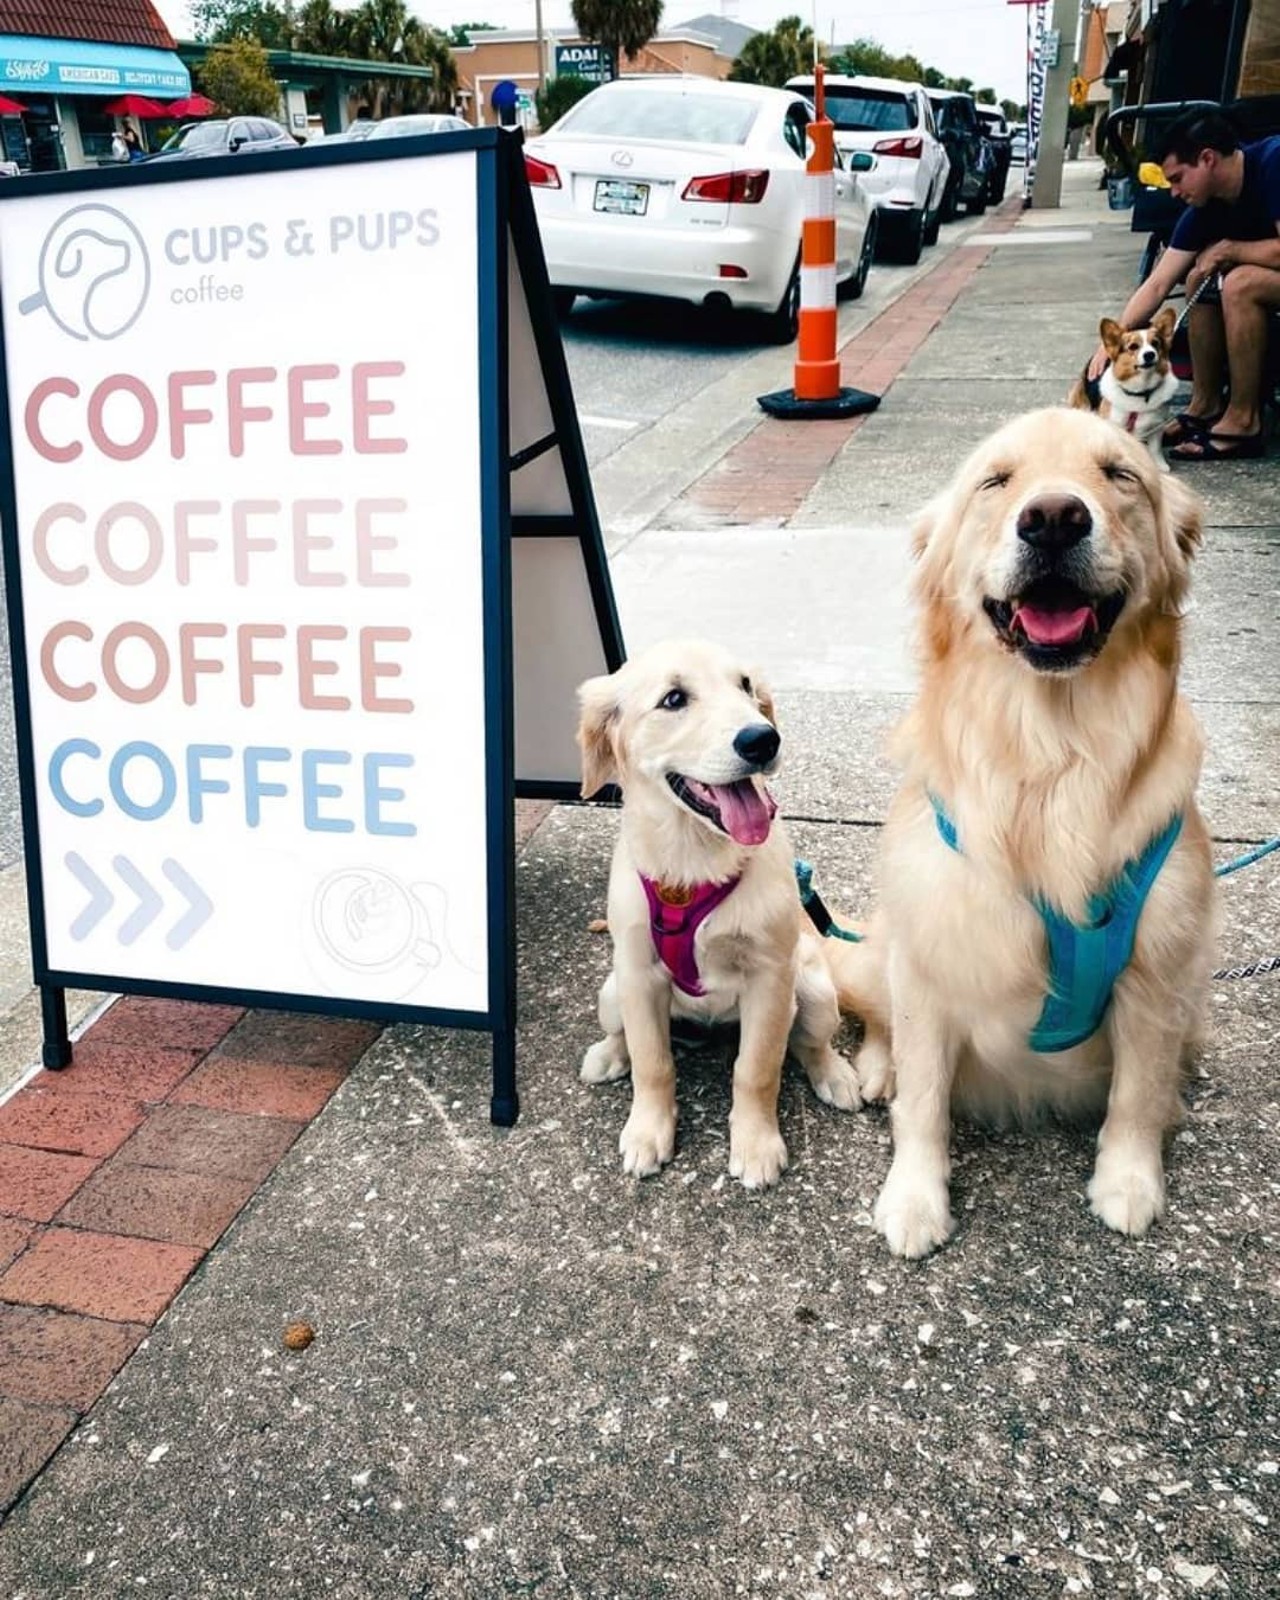 Cups and Pups Coffee 
1307 Edgewater Dr, Orlando, FL 32804, (407) 350-7917
This is a dog-friendly coffee shop that serves local pastries and Lineage coffee. It is the perfect place to get some studying done with your pup.
Photo via Cups and Pups Coffee/Facebook